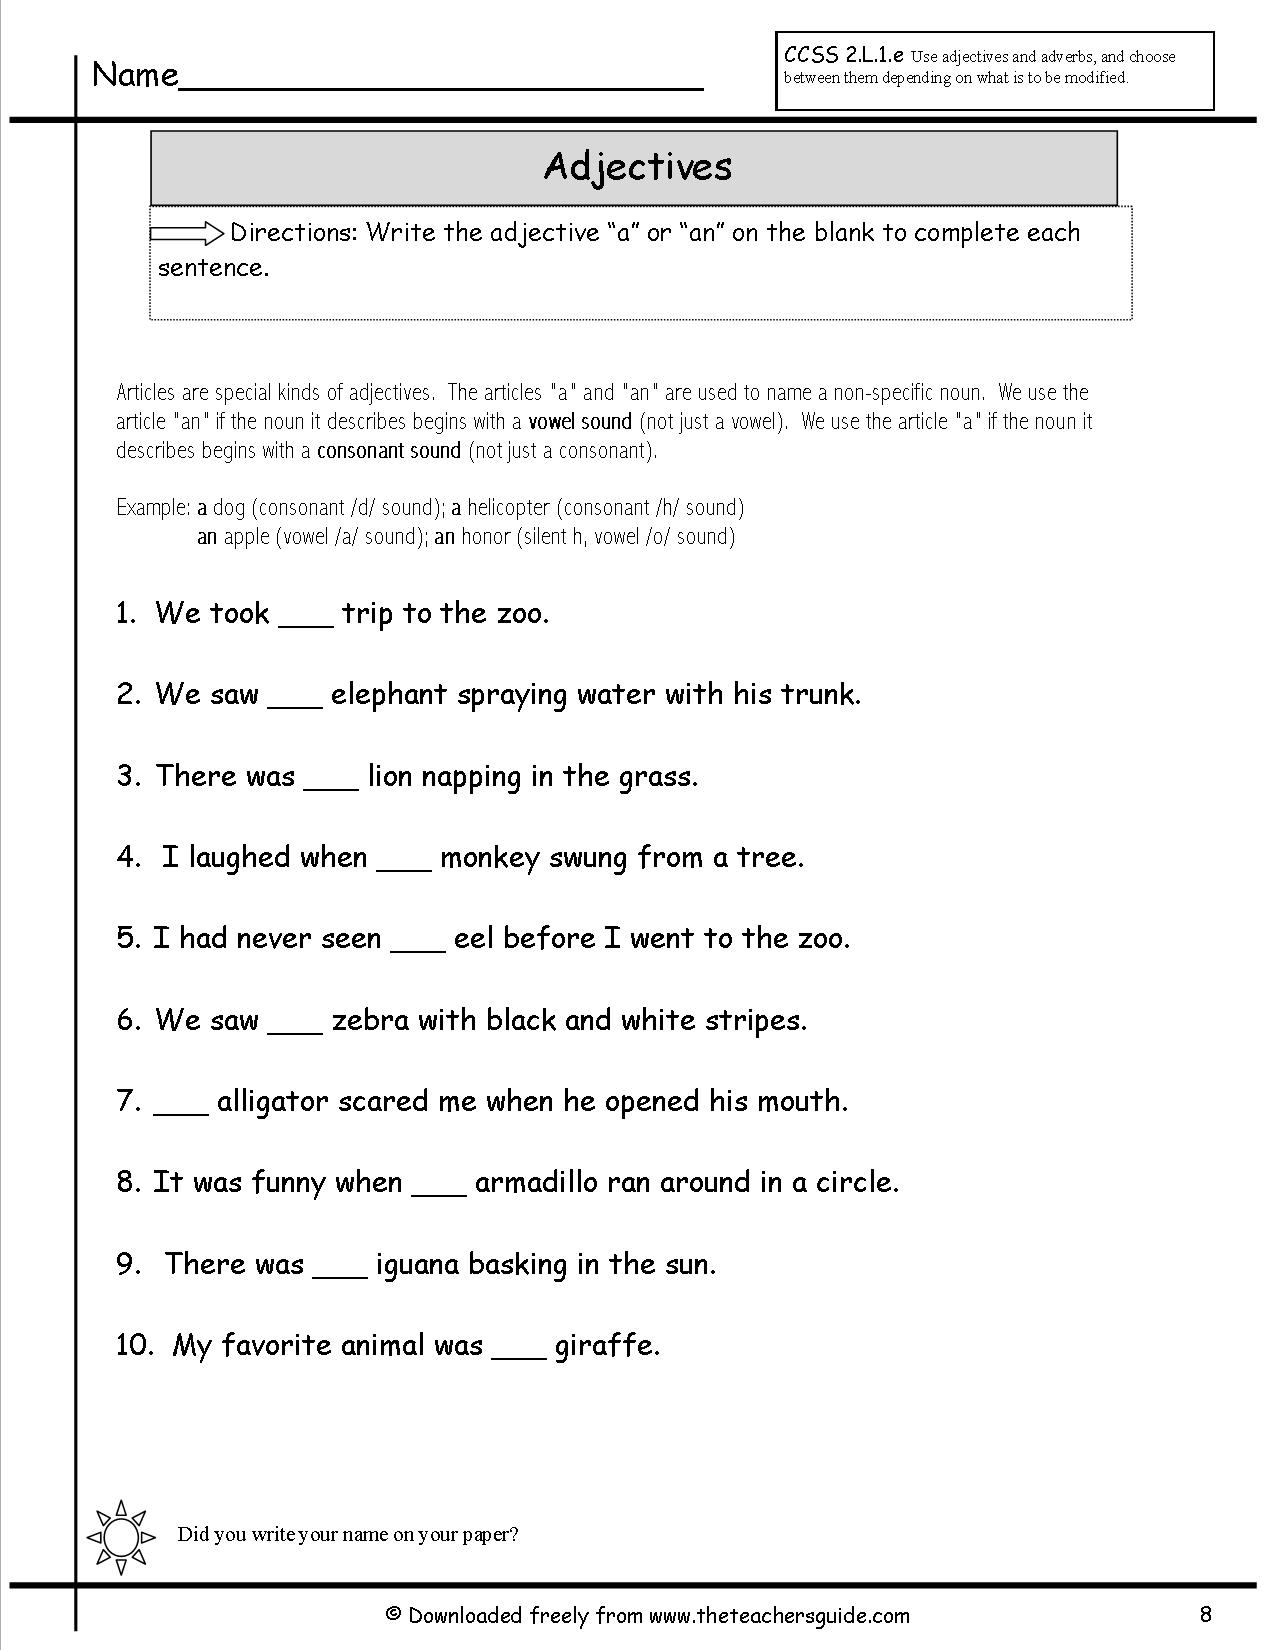 nouns-and-adjectives-esl-worksheet-by-natleb